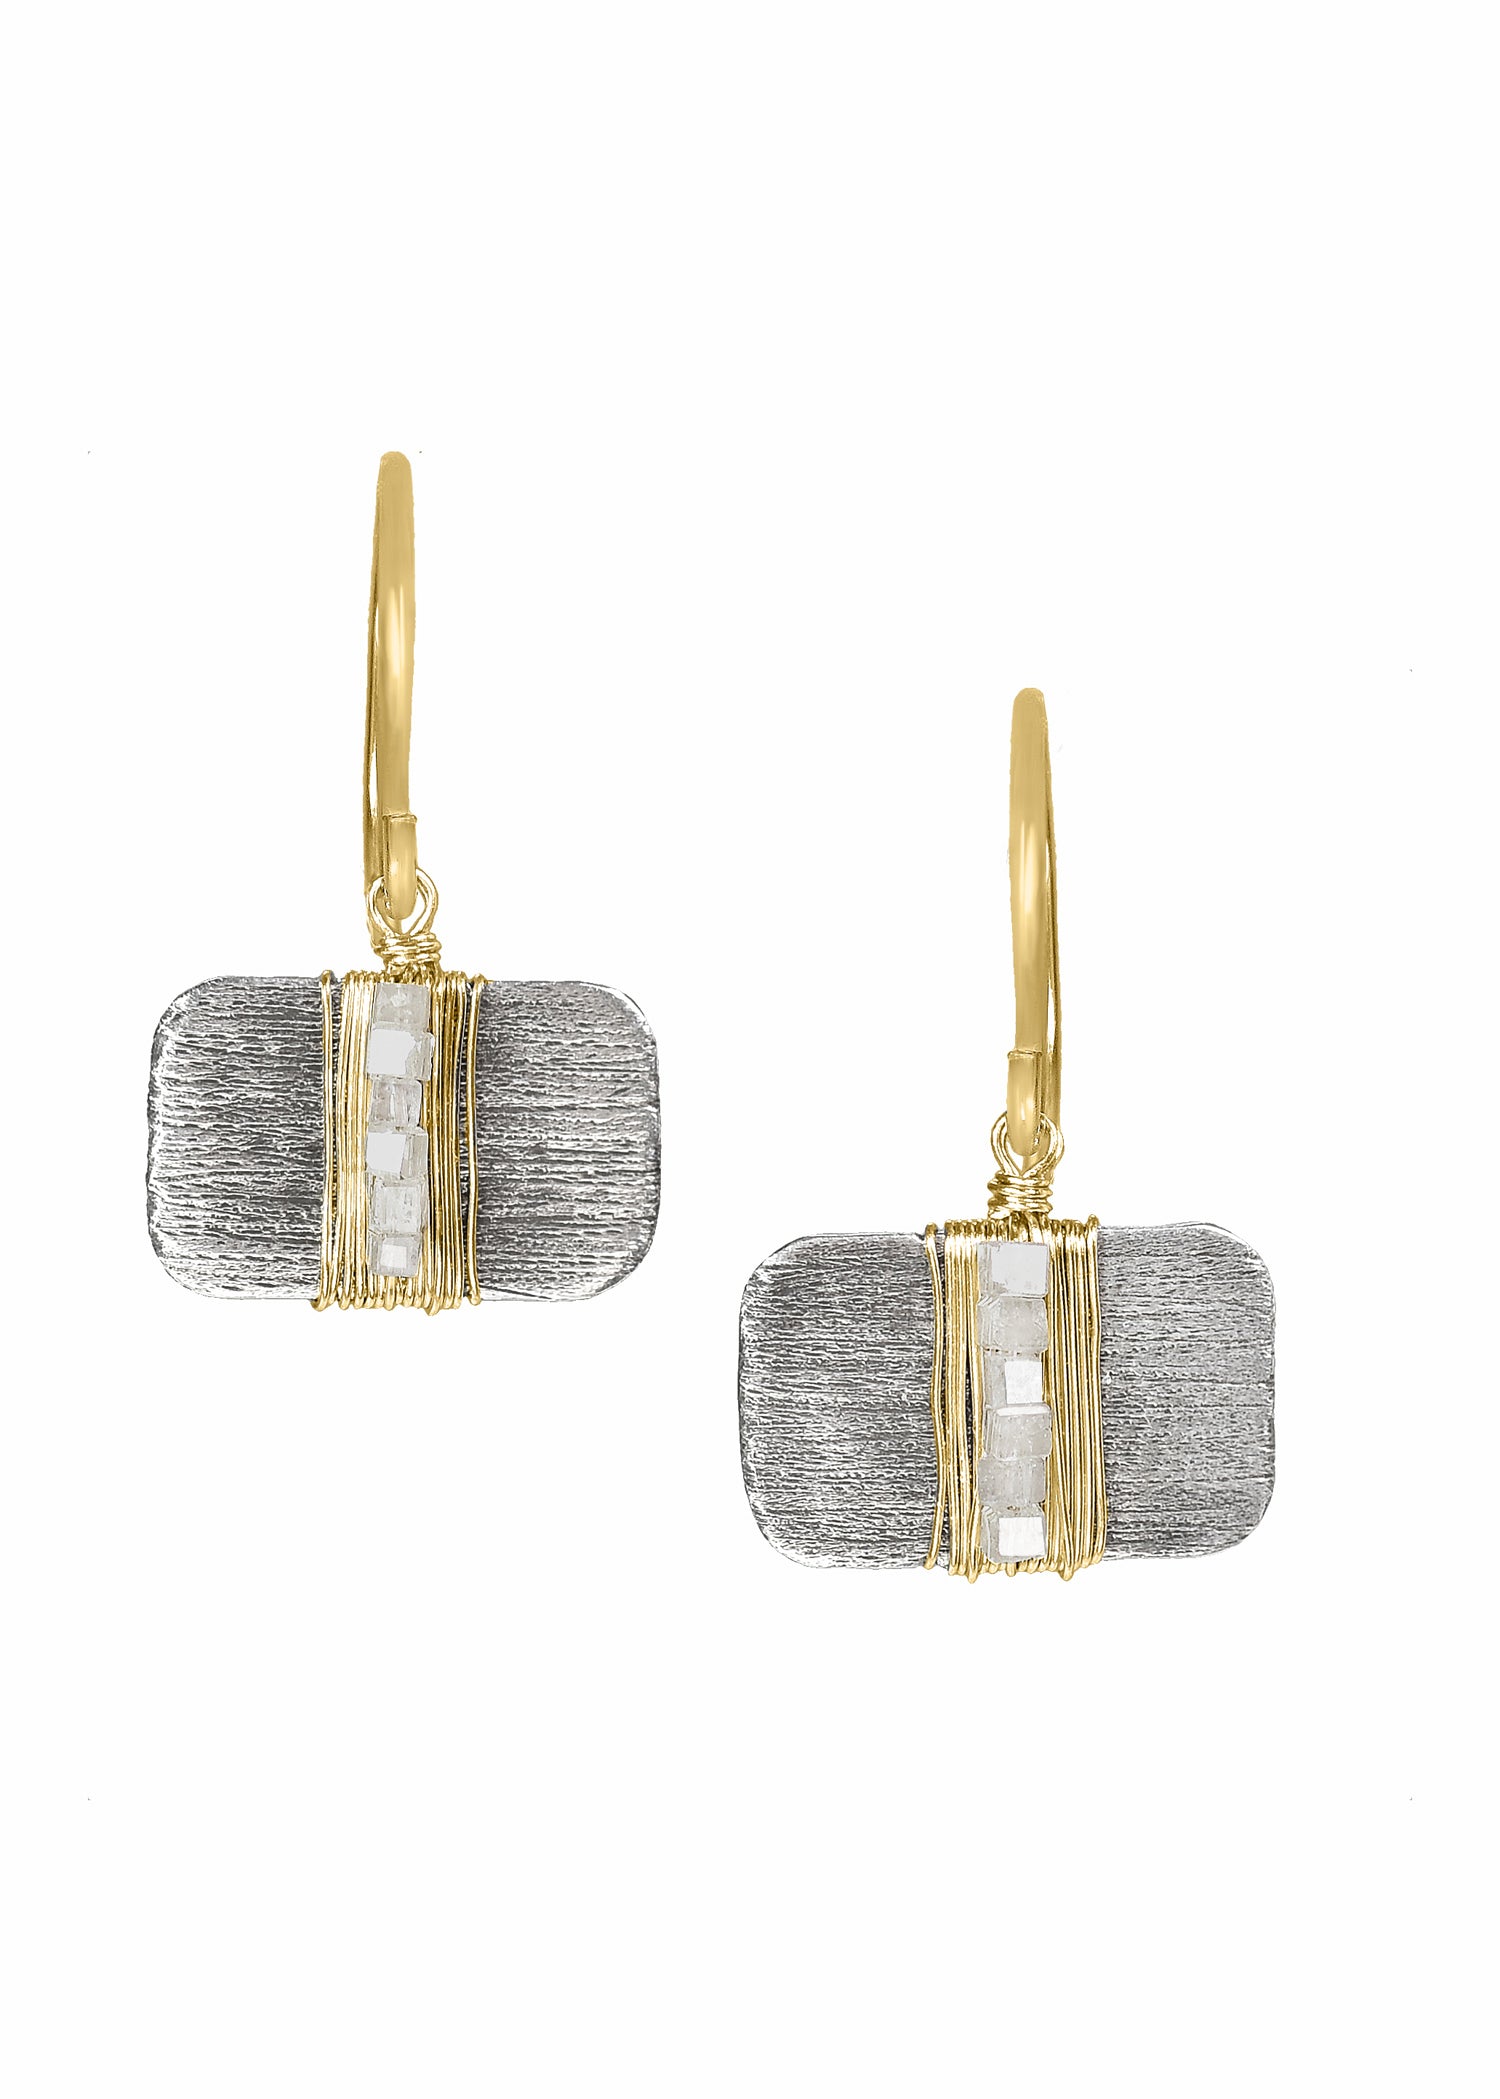 Diamond 14k gold Sterling silver Mixed metal Earrings measure 13/16" in length (including the ear wires) and 1/2" in width Handmade in our Los Angeles studio